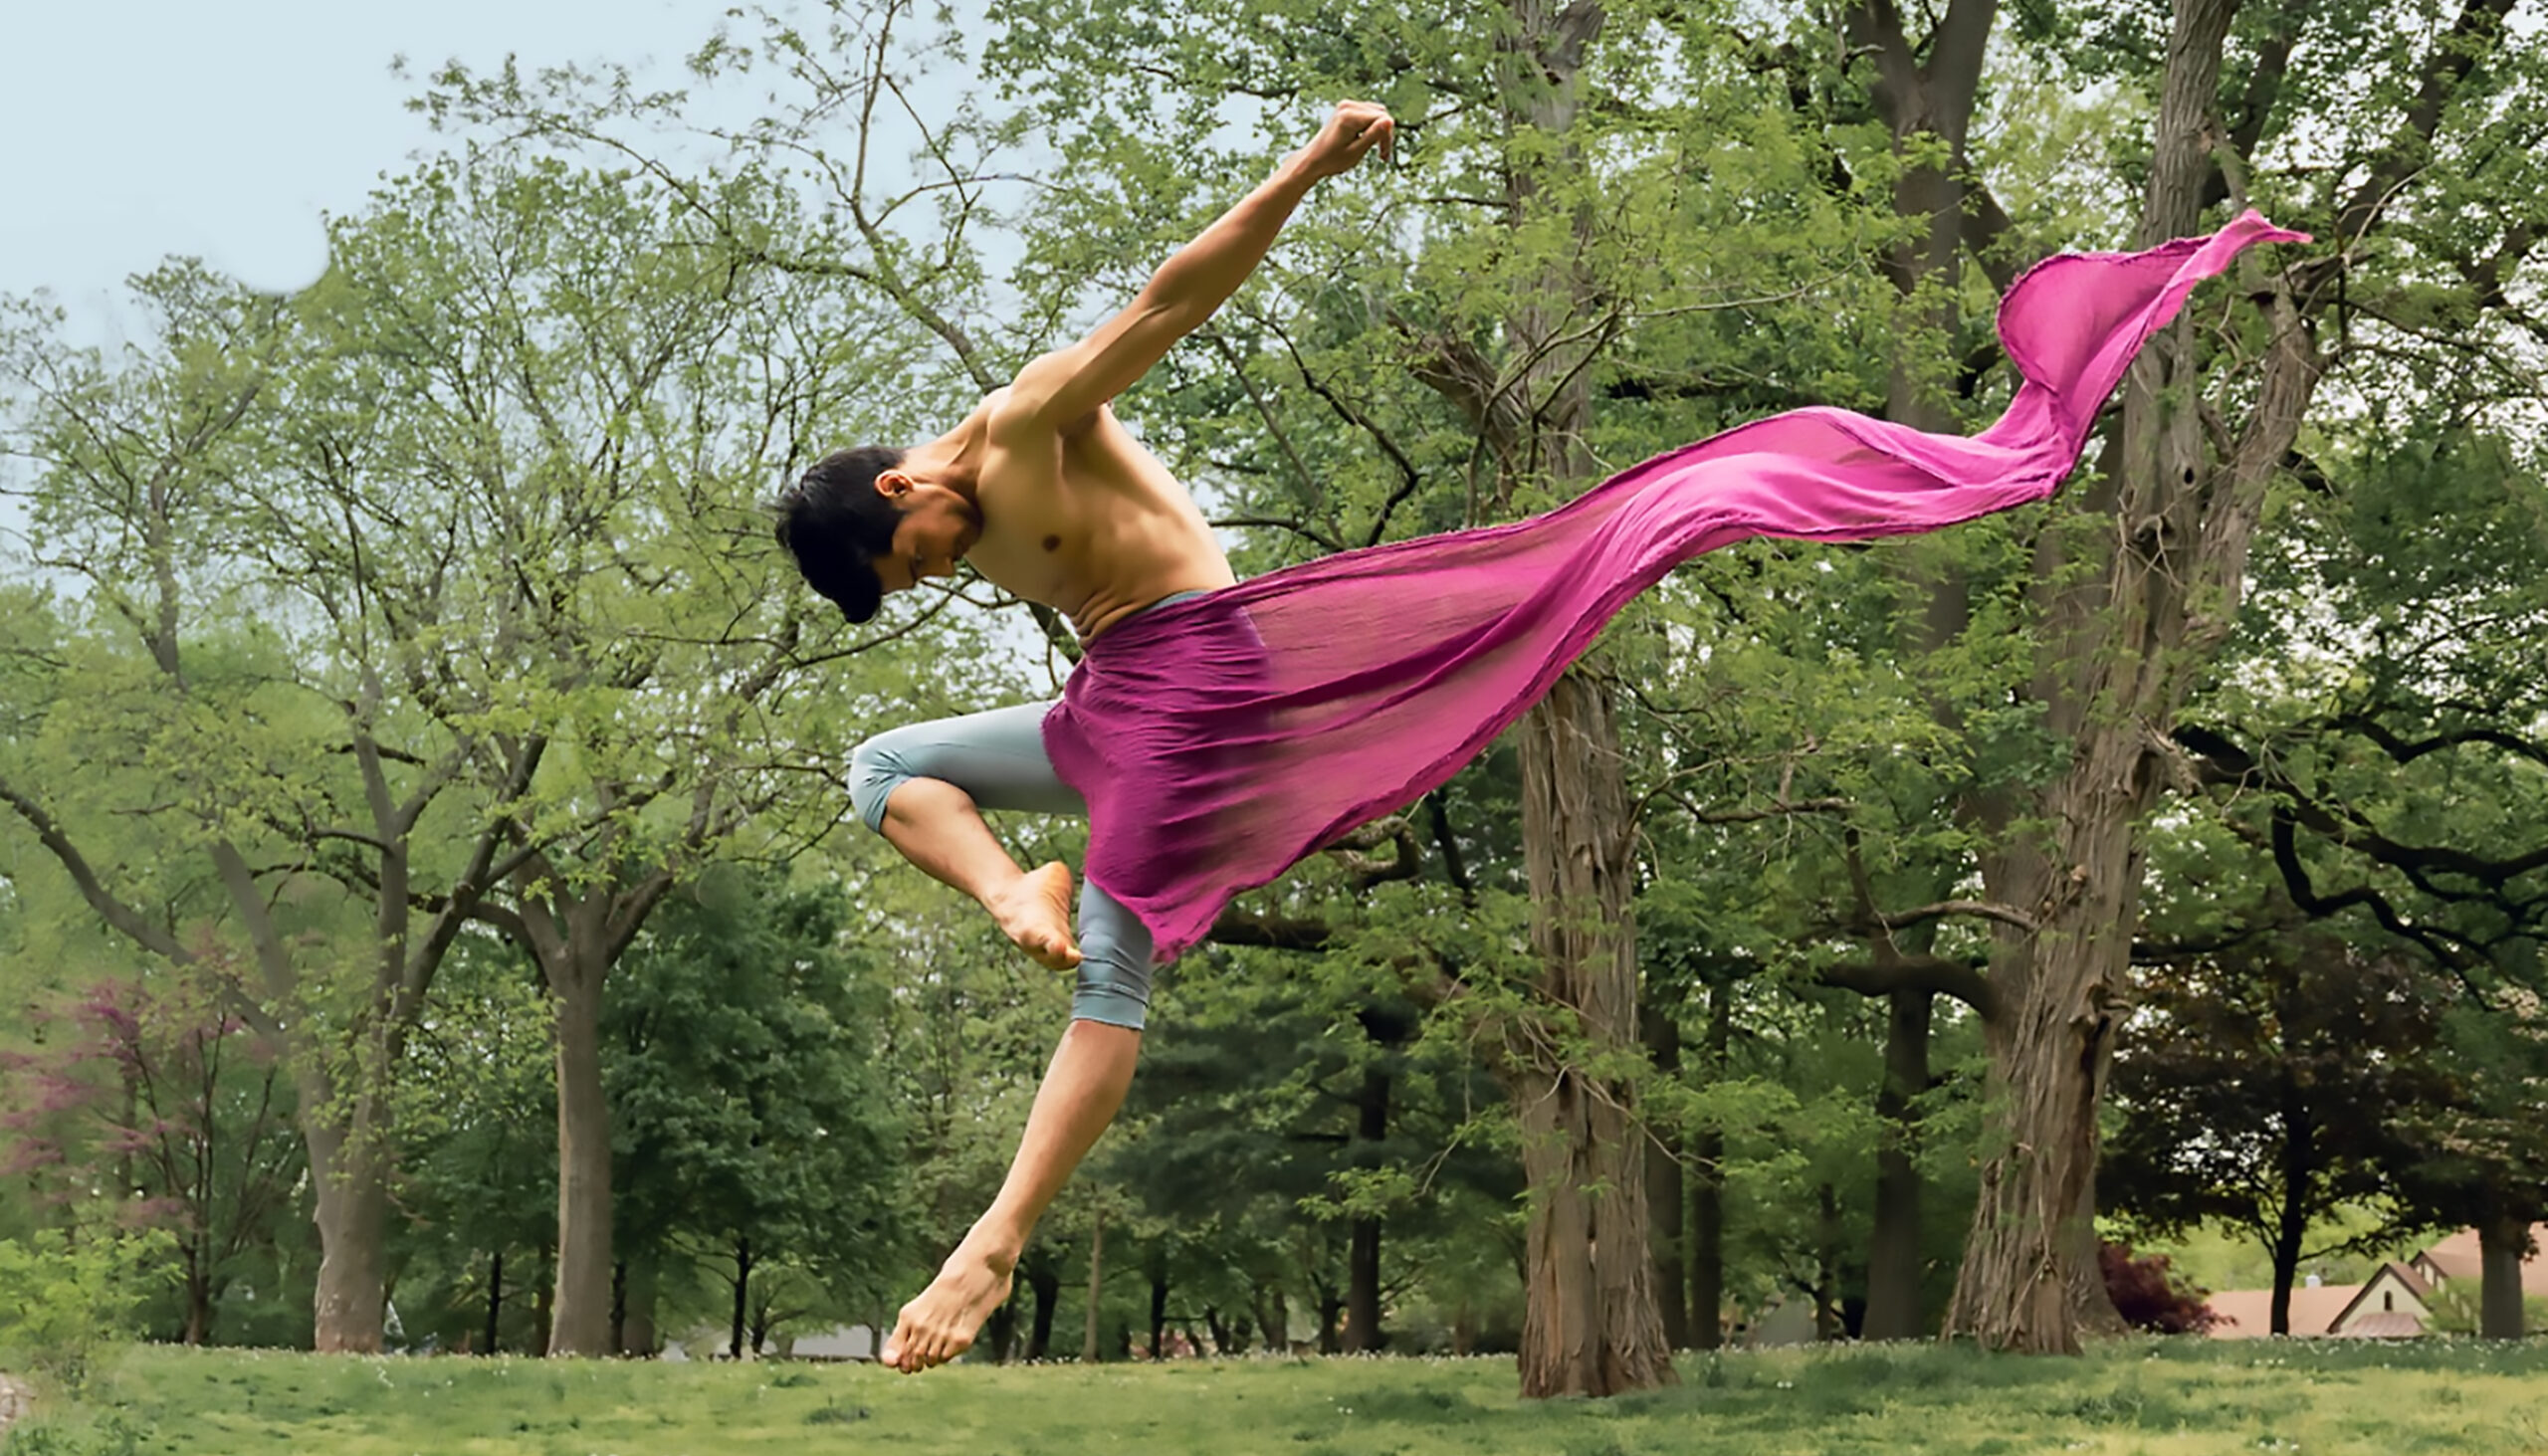 Manish Chauhan flies through the air outside in a stylized jump in retire devant, his body pitched forward and arms thrown back, a magenta scarf flowing behind him as it wraps around his front.